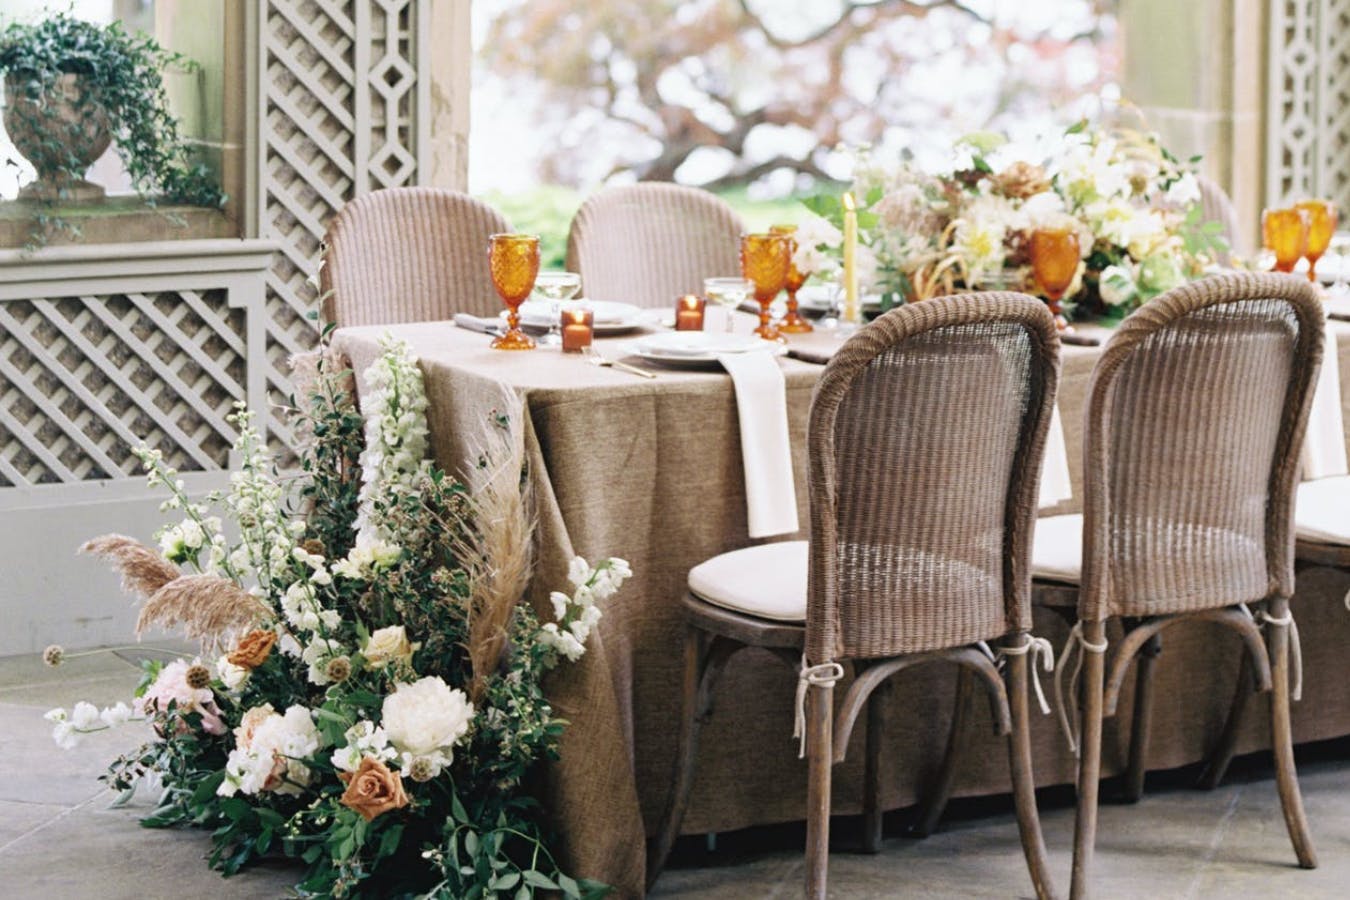 Simple boho-style wedding reception table with florals decor | PartySlate